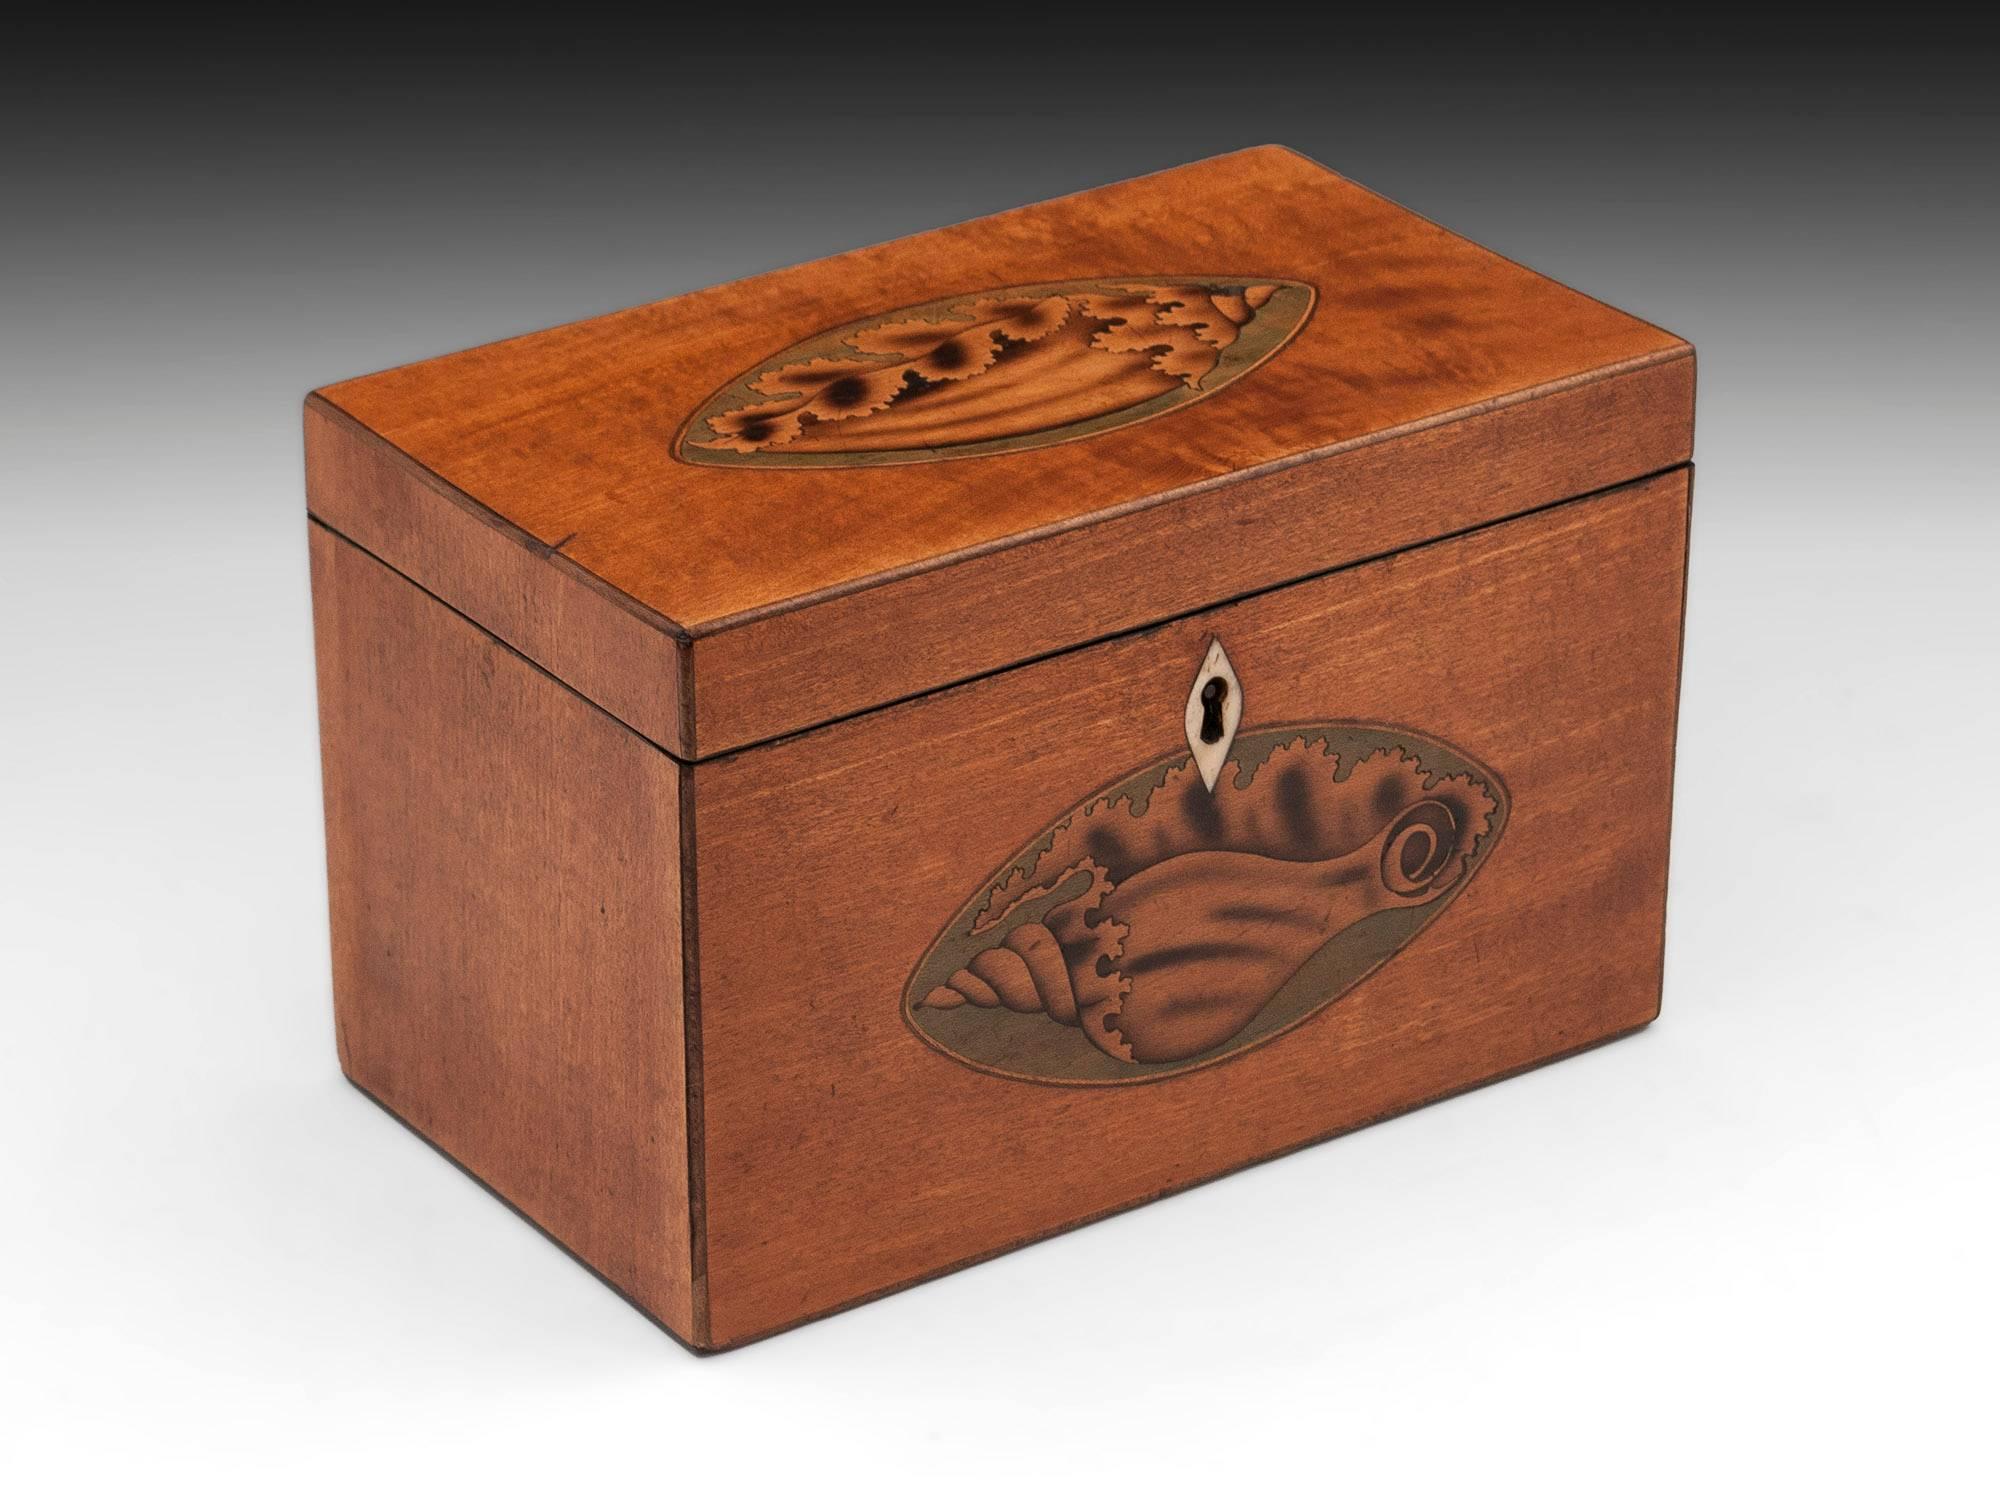 George III Satinwood Antique Tea Caddy with Inlaid Conch Shells, 18th Century